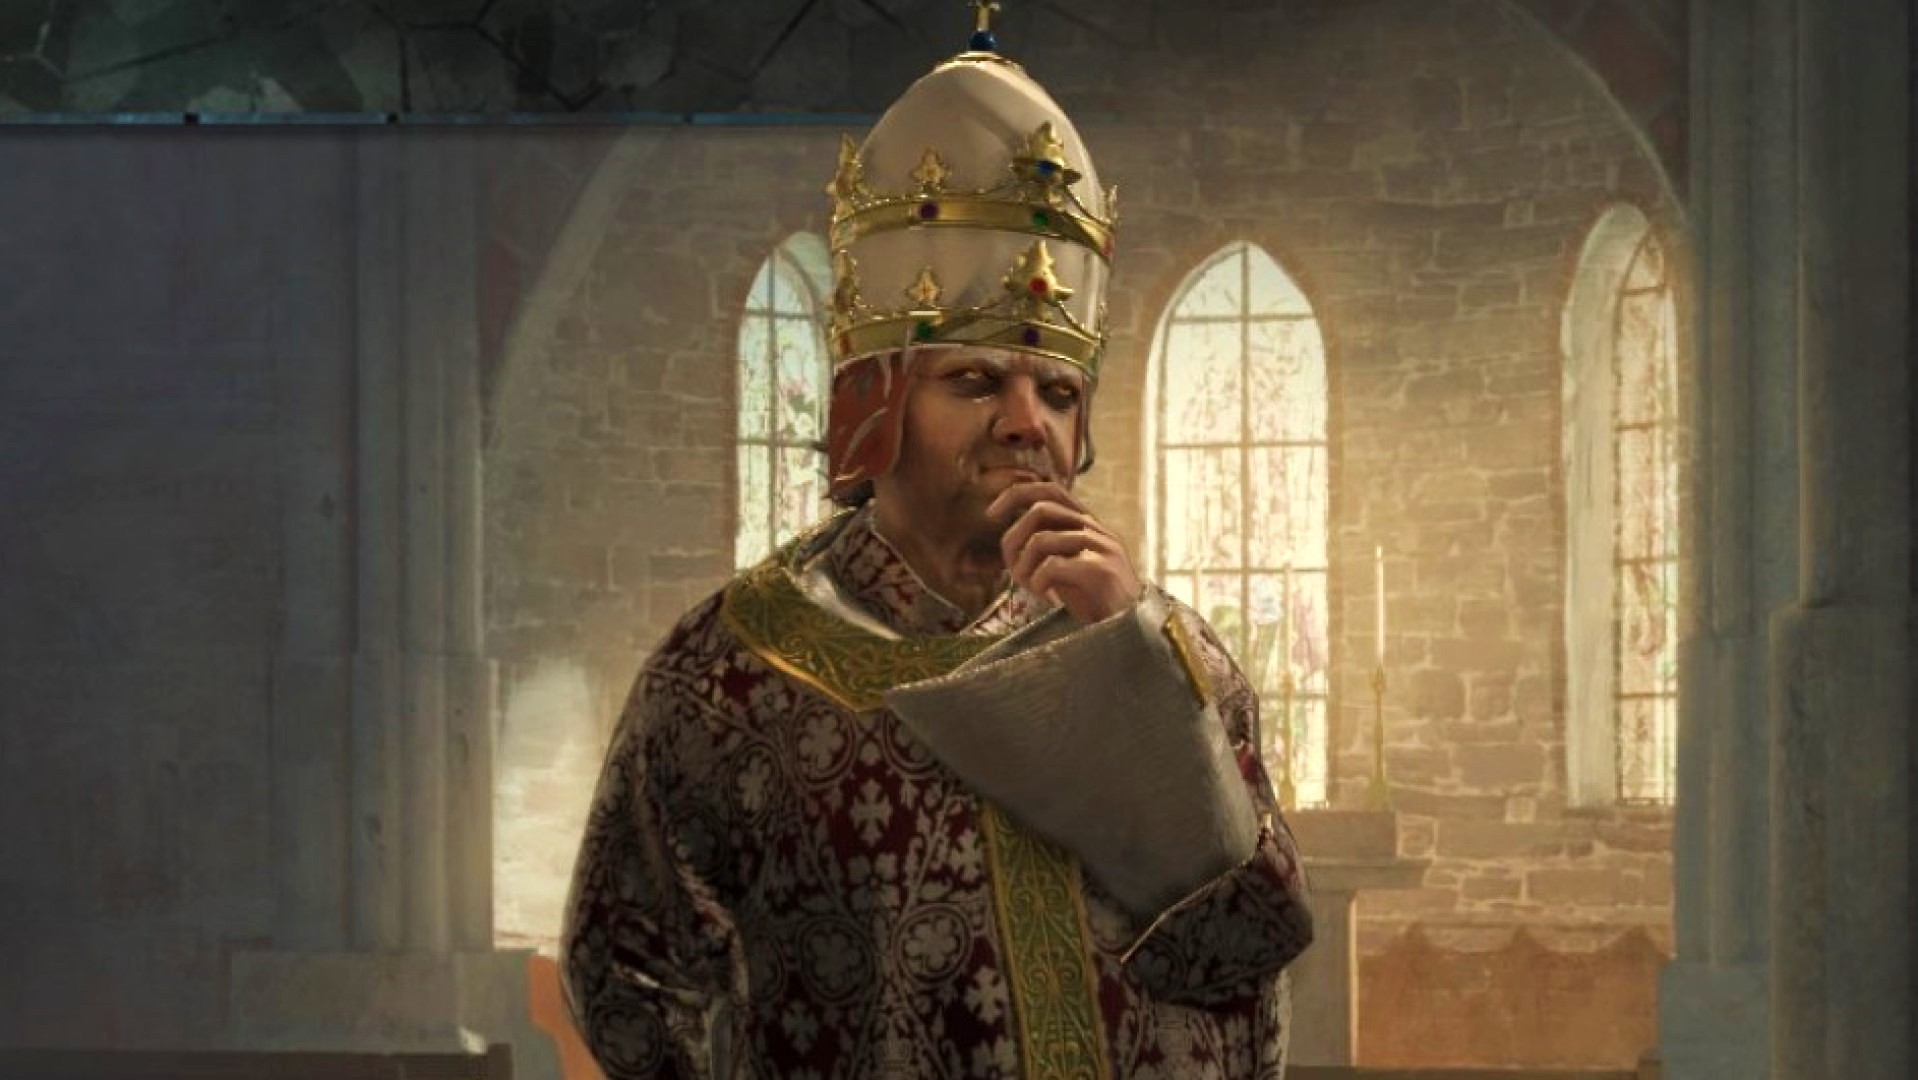 Finally, everyone will stop wearing Jester hats in Crusader Kings 3